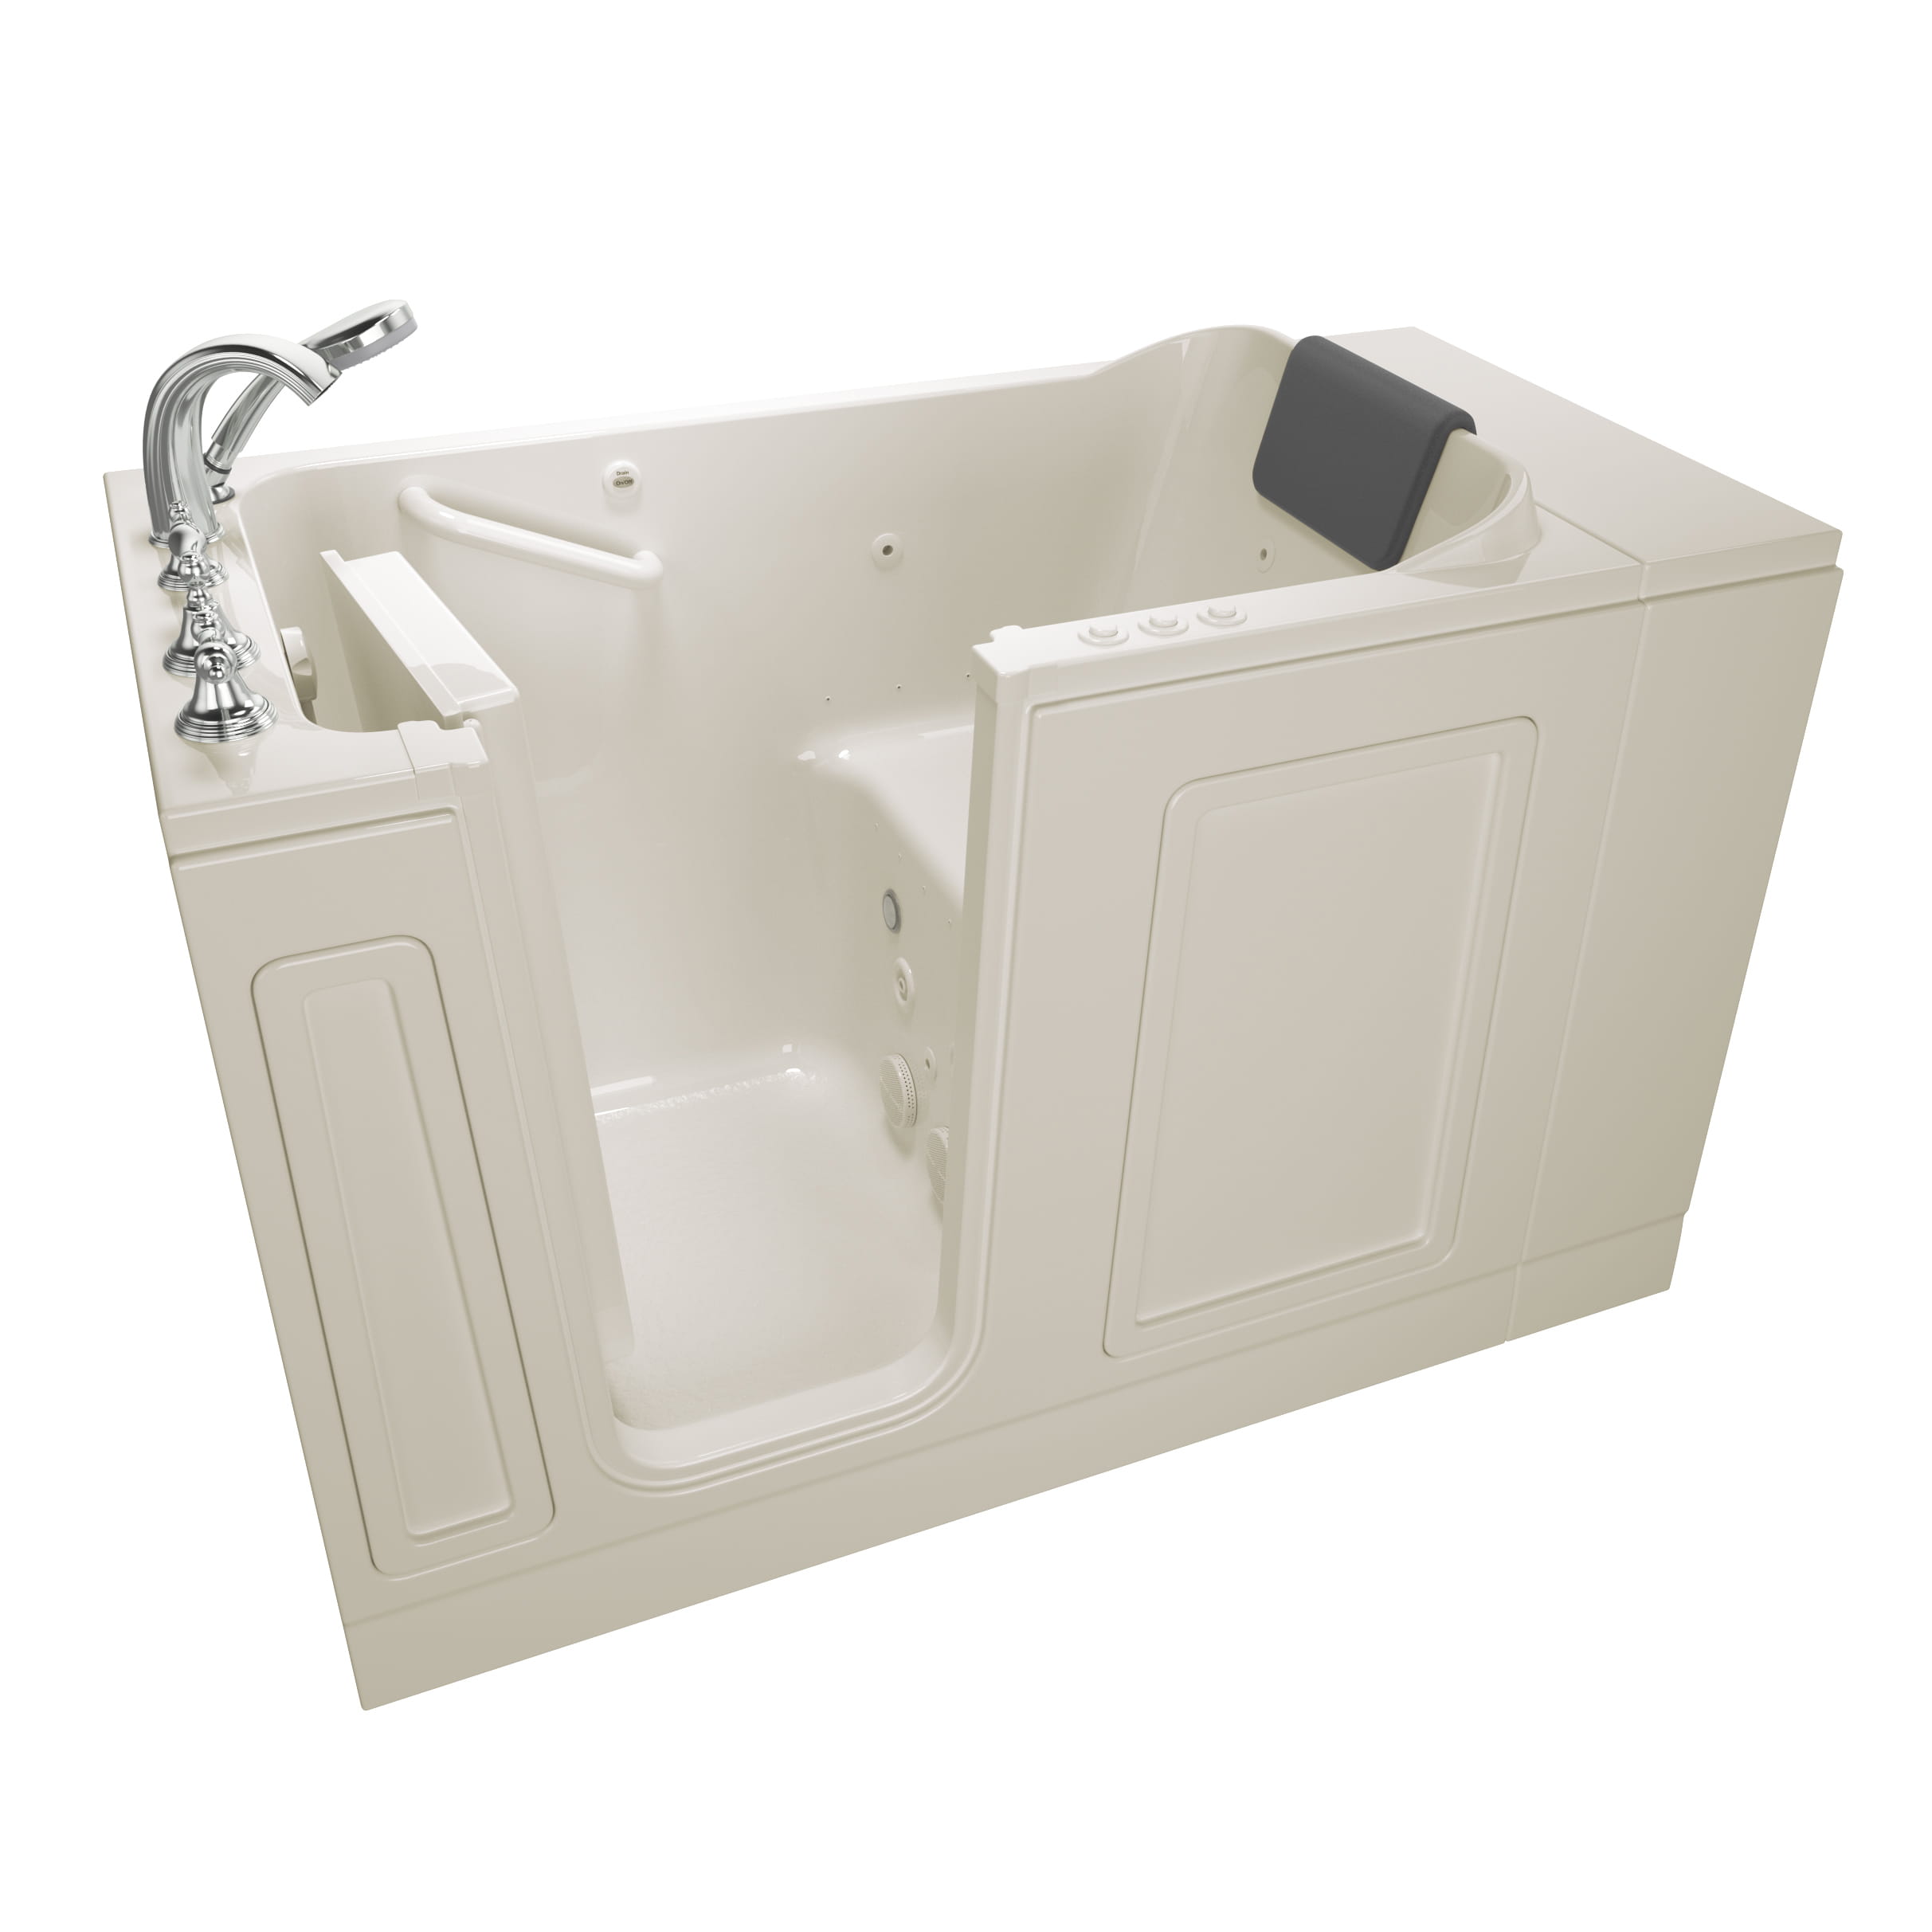 Acrylic Luxury Series 30 x 51  Inch Walk in Tub With Combination Air Spa and Whirlpool Systems   Left Hand Drain With Faucet WIB LINEN